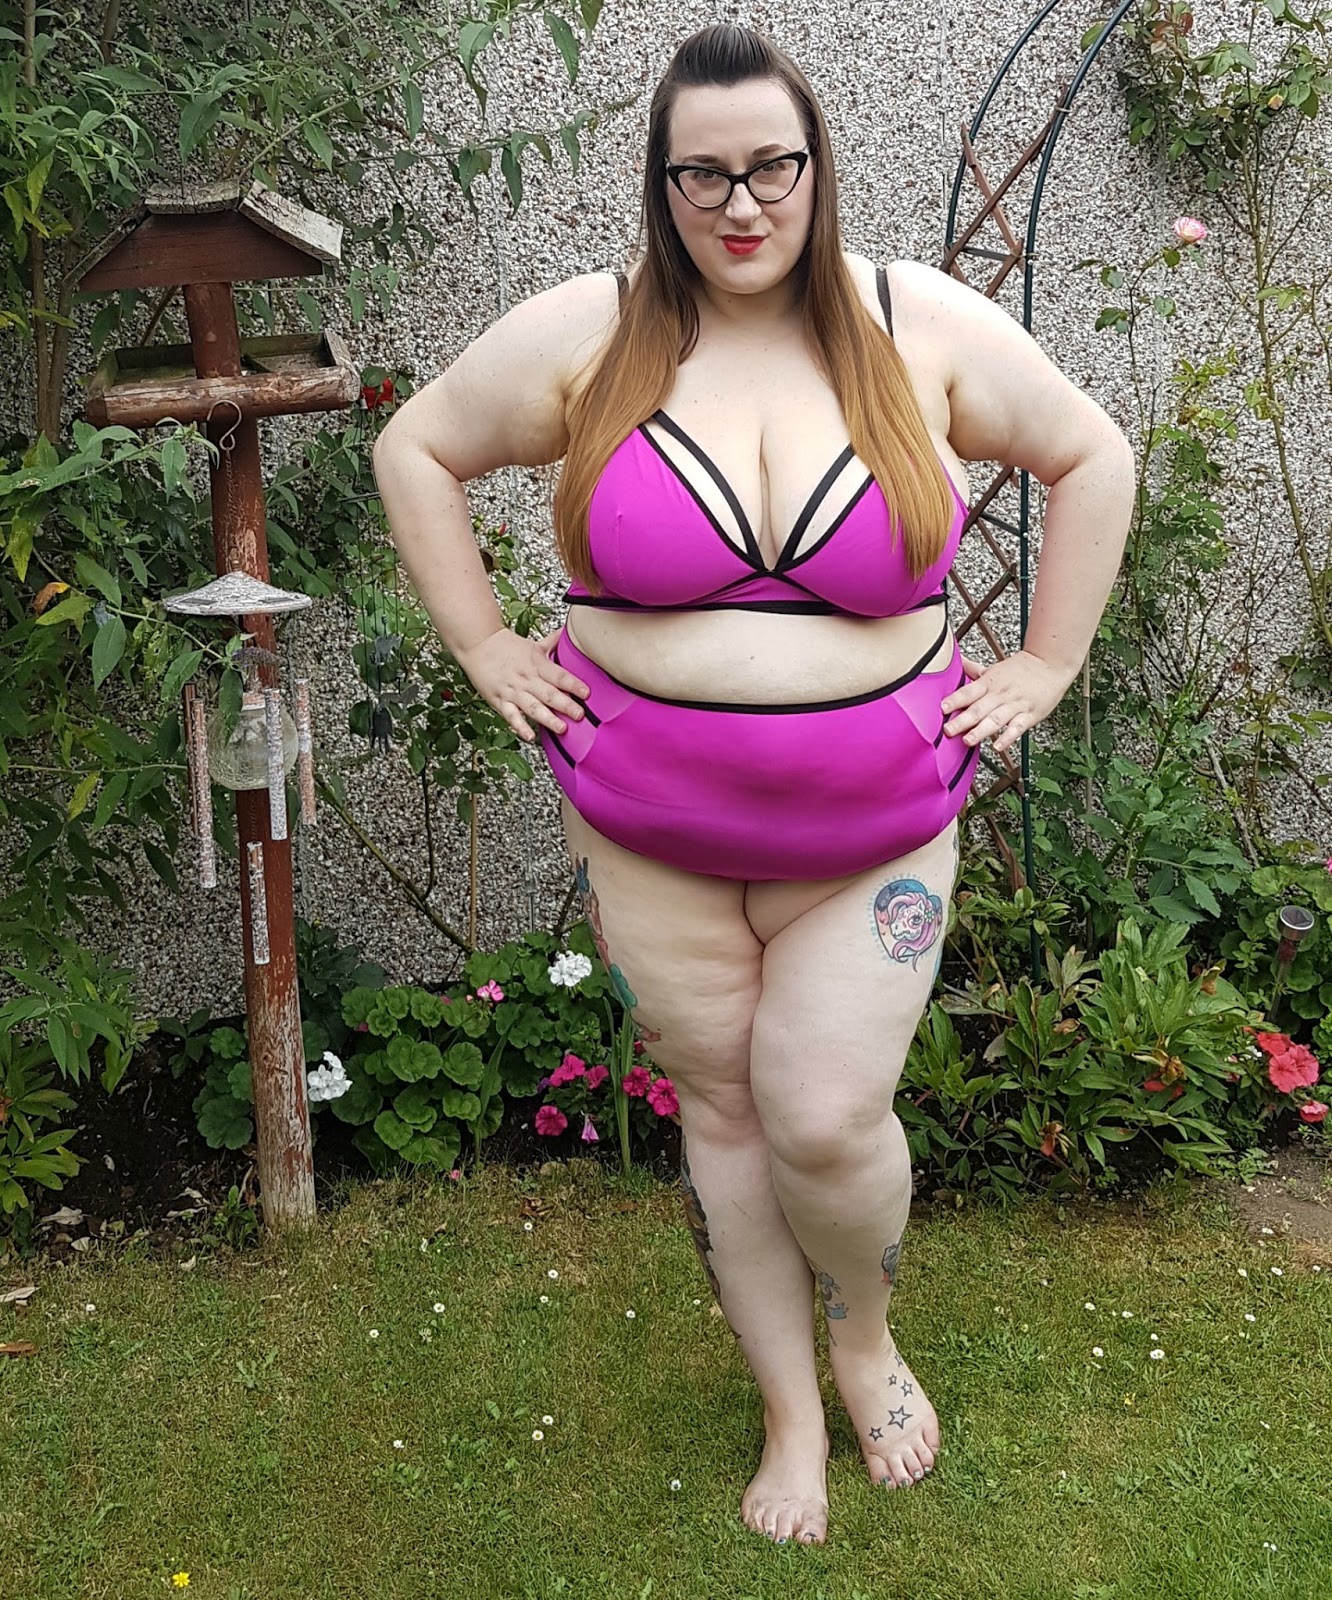 New Plus Strapping Lingerie Review Does My Blog Make Me Fat?